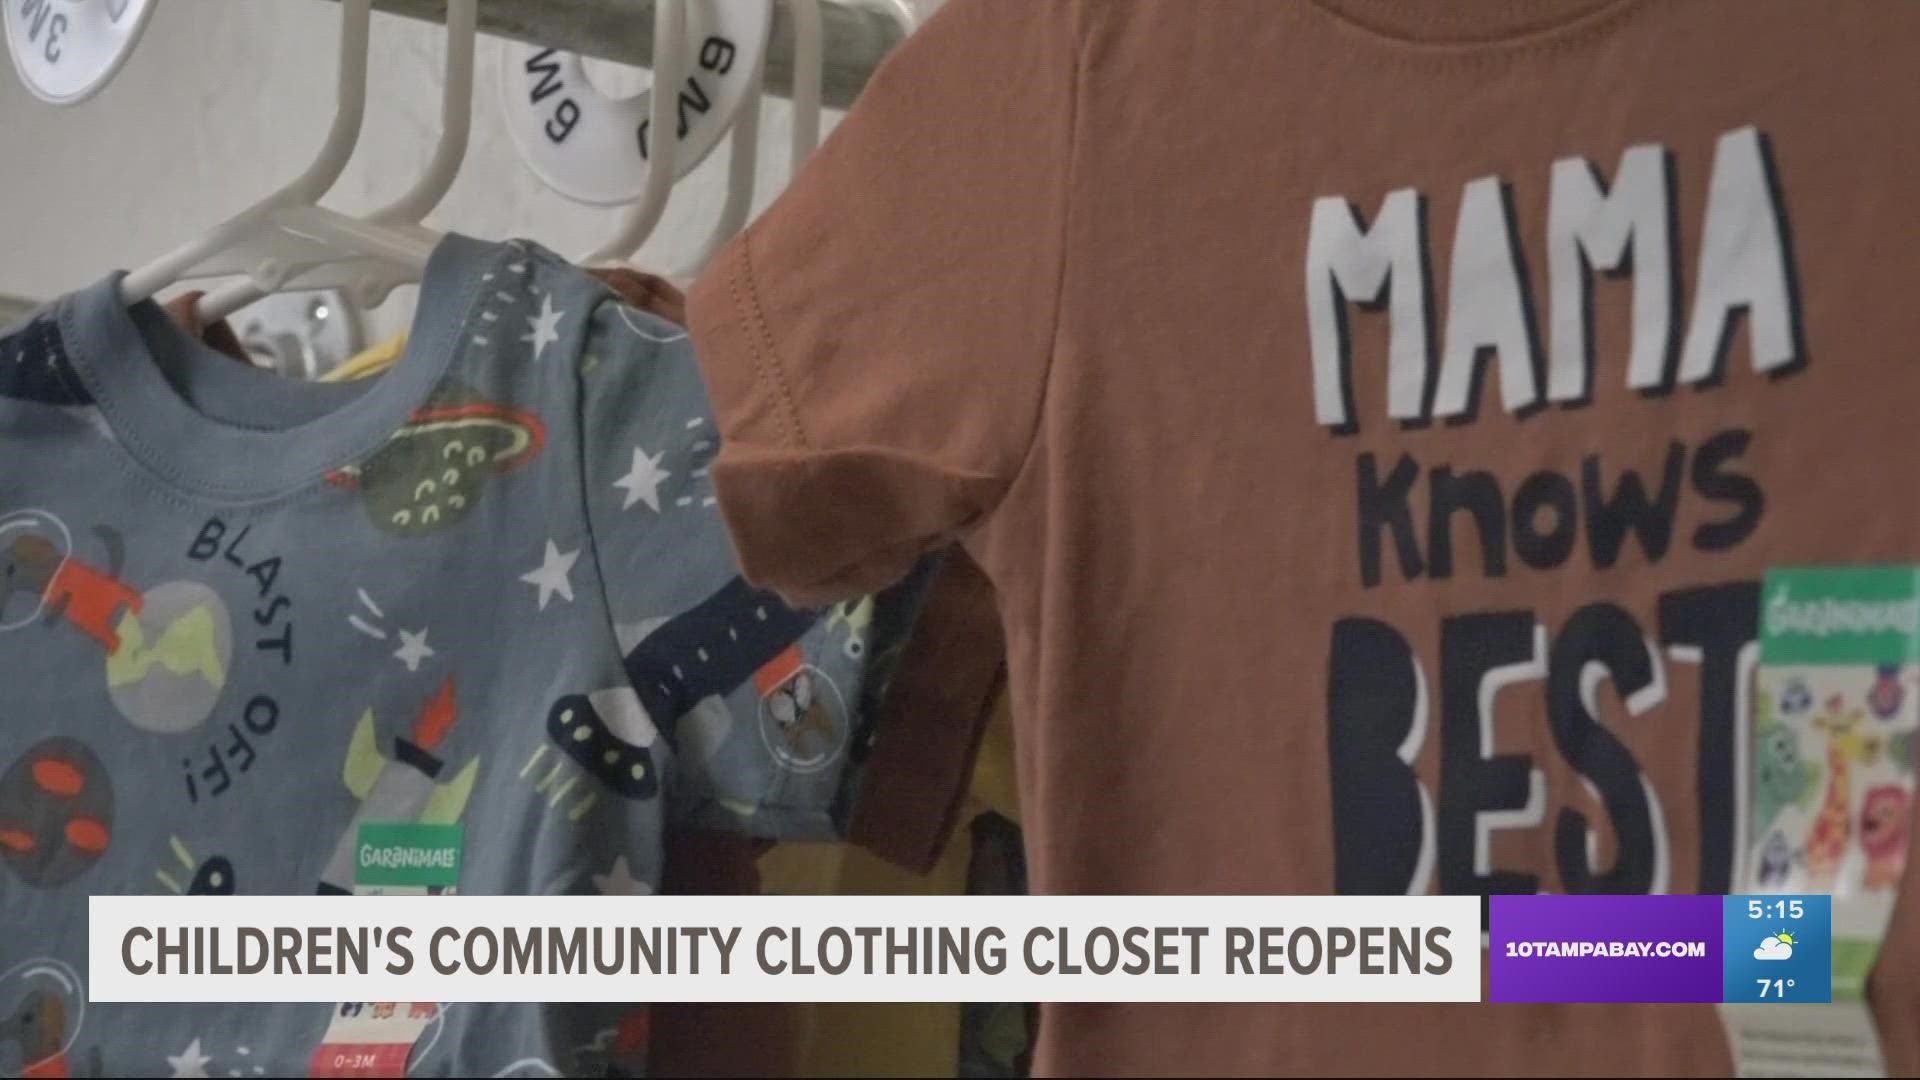 The two rooms of the clothing closet are divided with one room filled with items for families with infants and another room with items for teens up to 18.